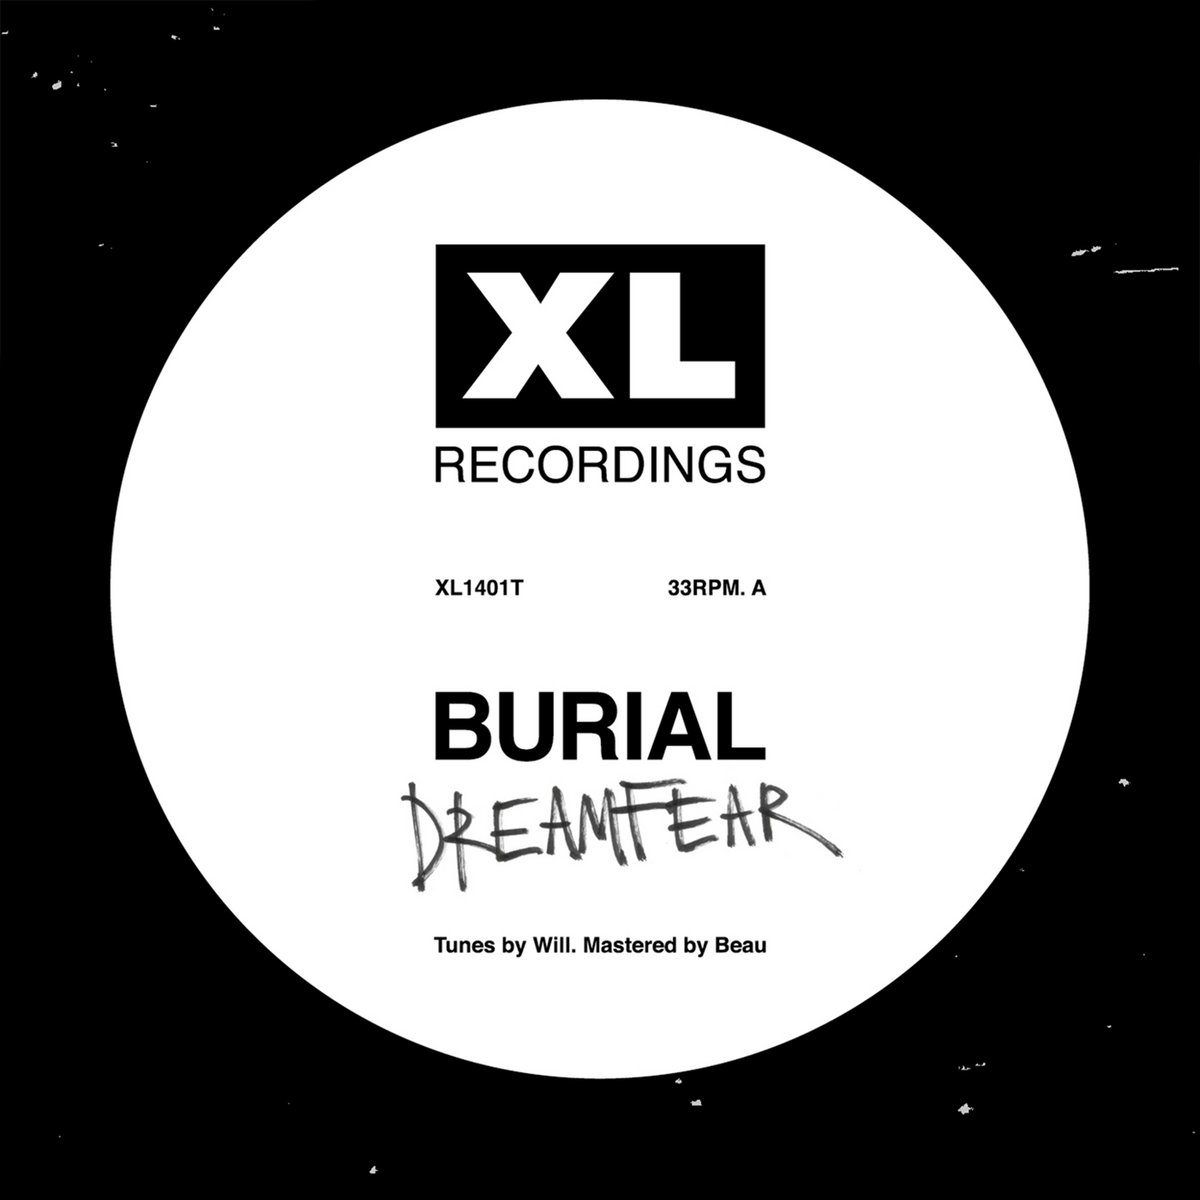 Burial Dreamfear : Boy Sent From Above